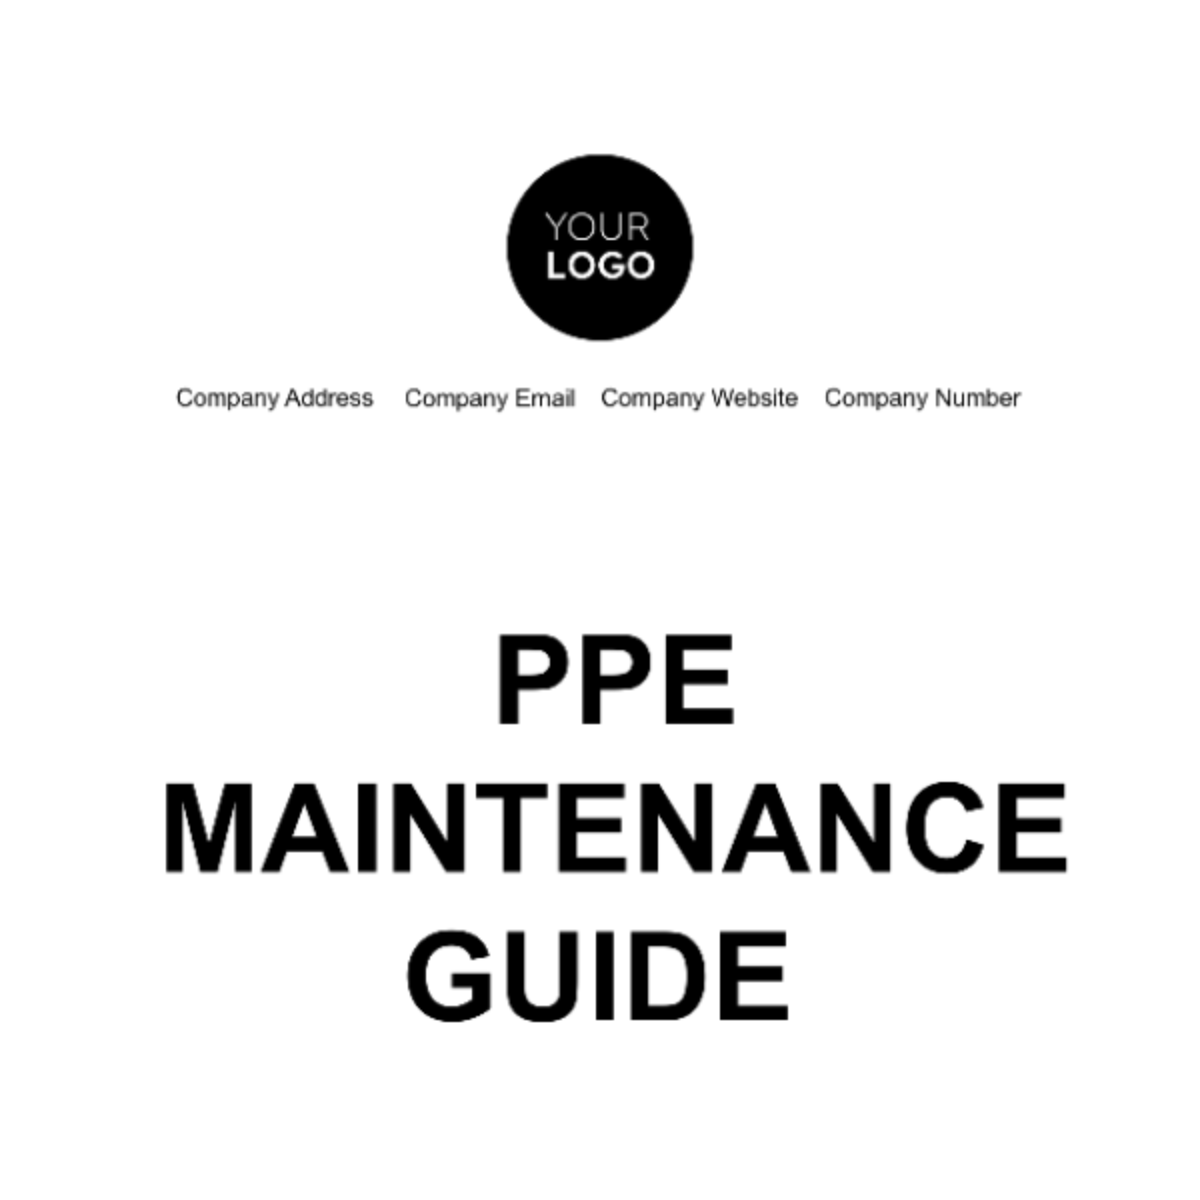 Free PPE Maintenance Guide Template